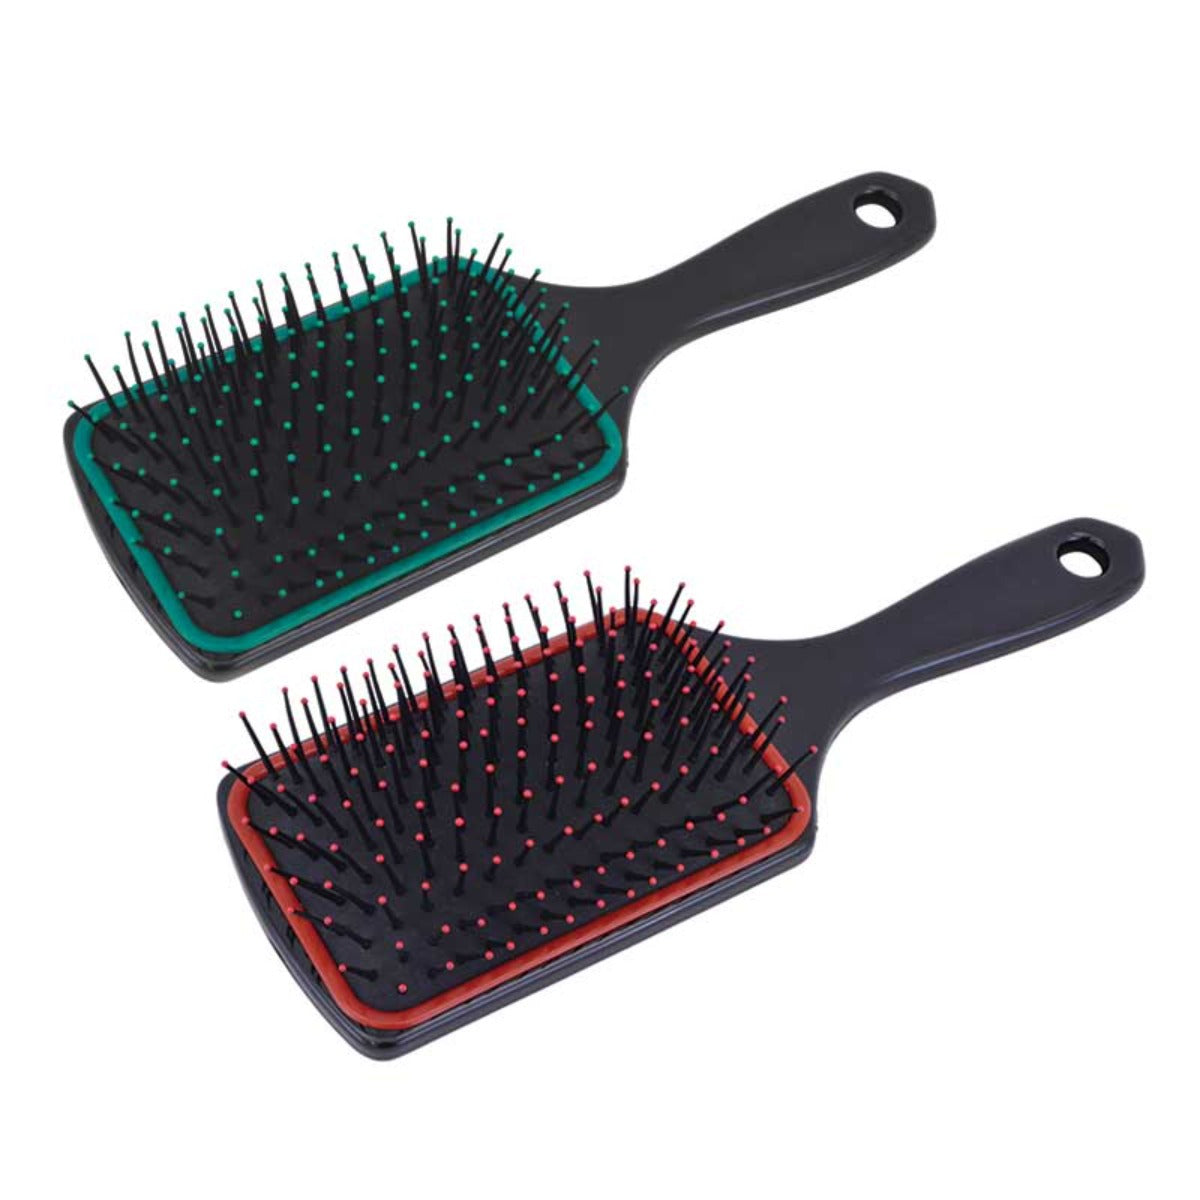 Deluxe Cleaning Brush